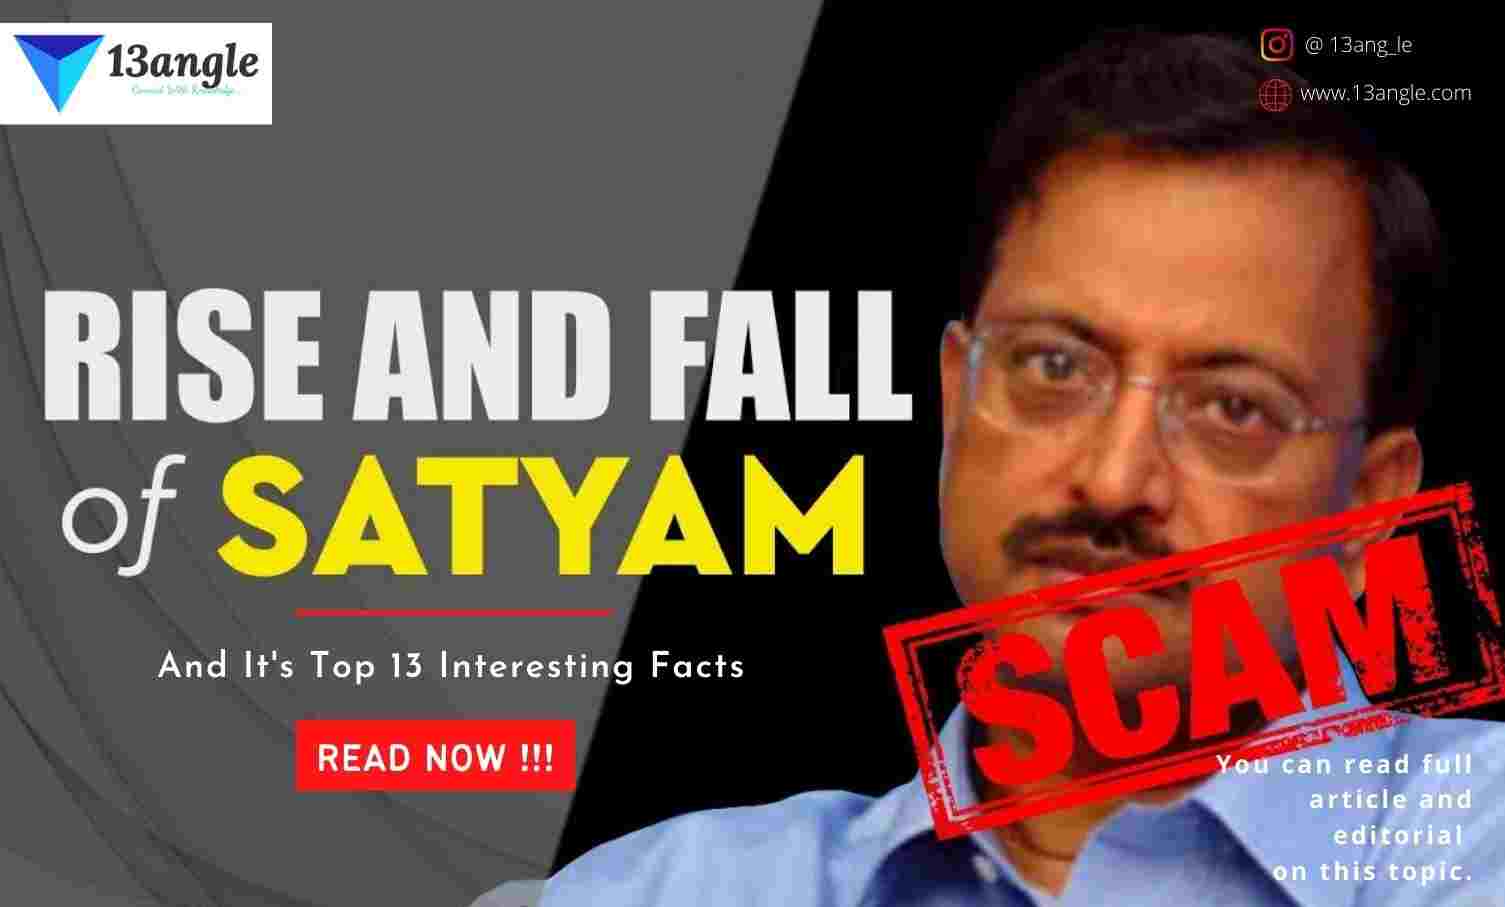 The Satyam Scam And It's Top 13 Interesting Facts- 13angle.com